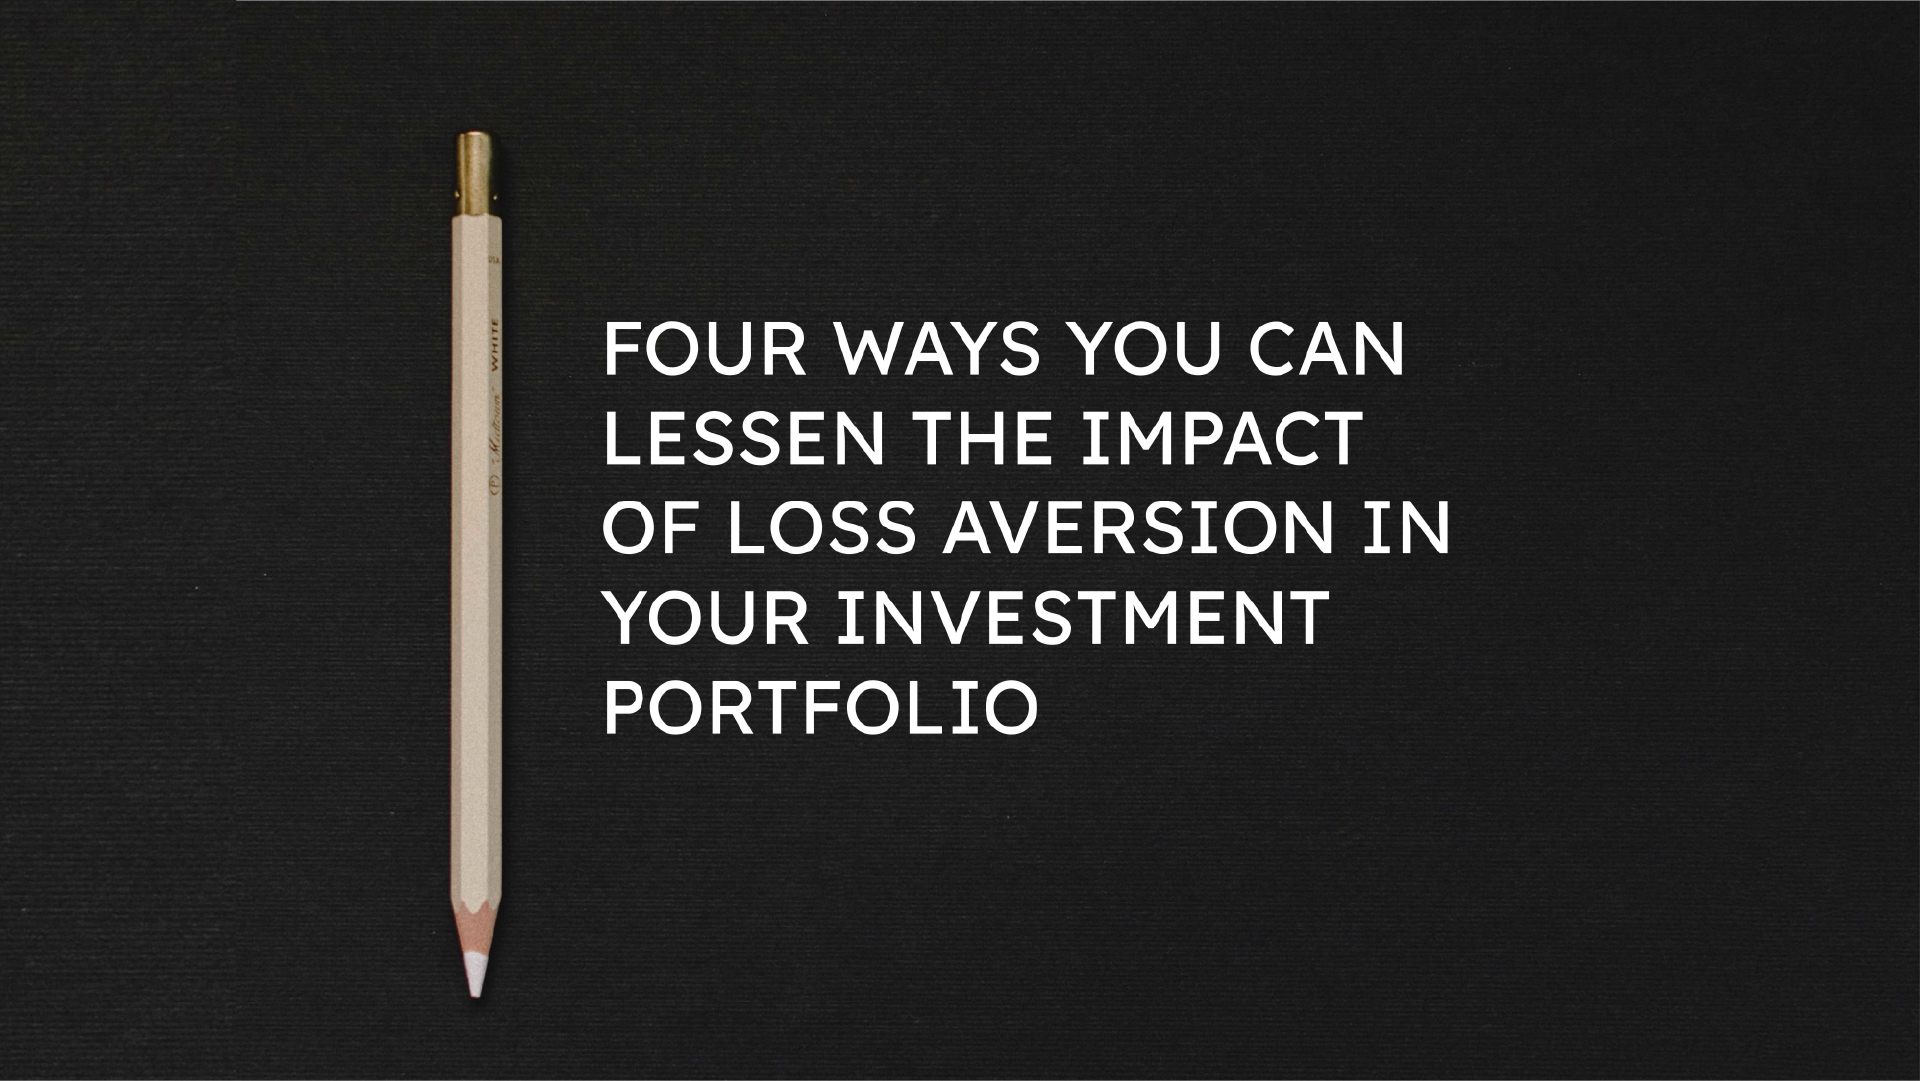 Four Ways You Can Lessen the Impact of Loss Aversion in Your Investment Portfolio